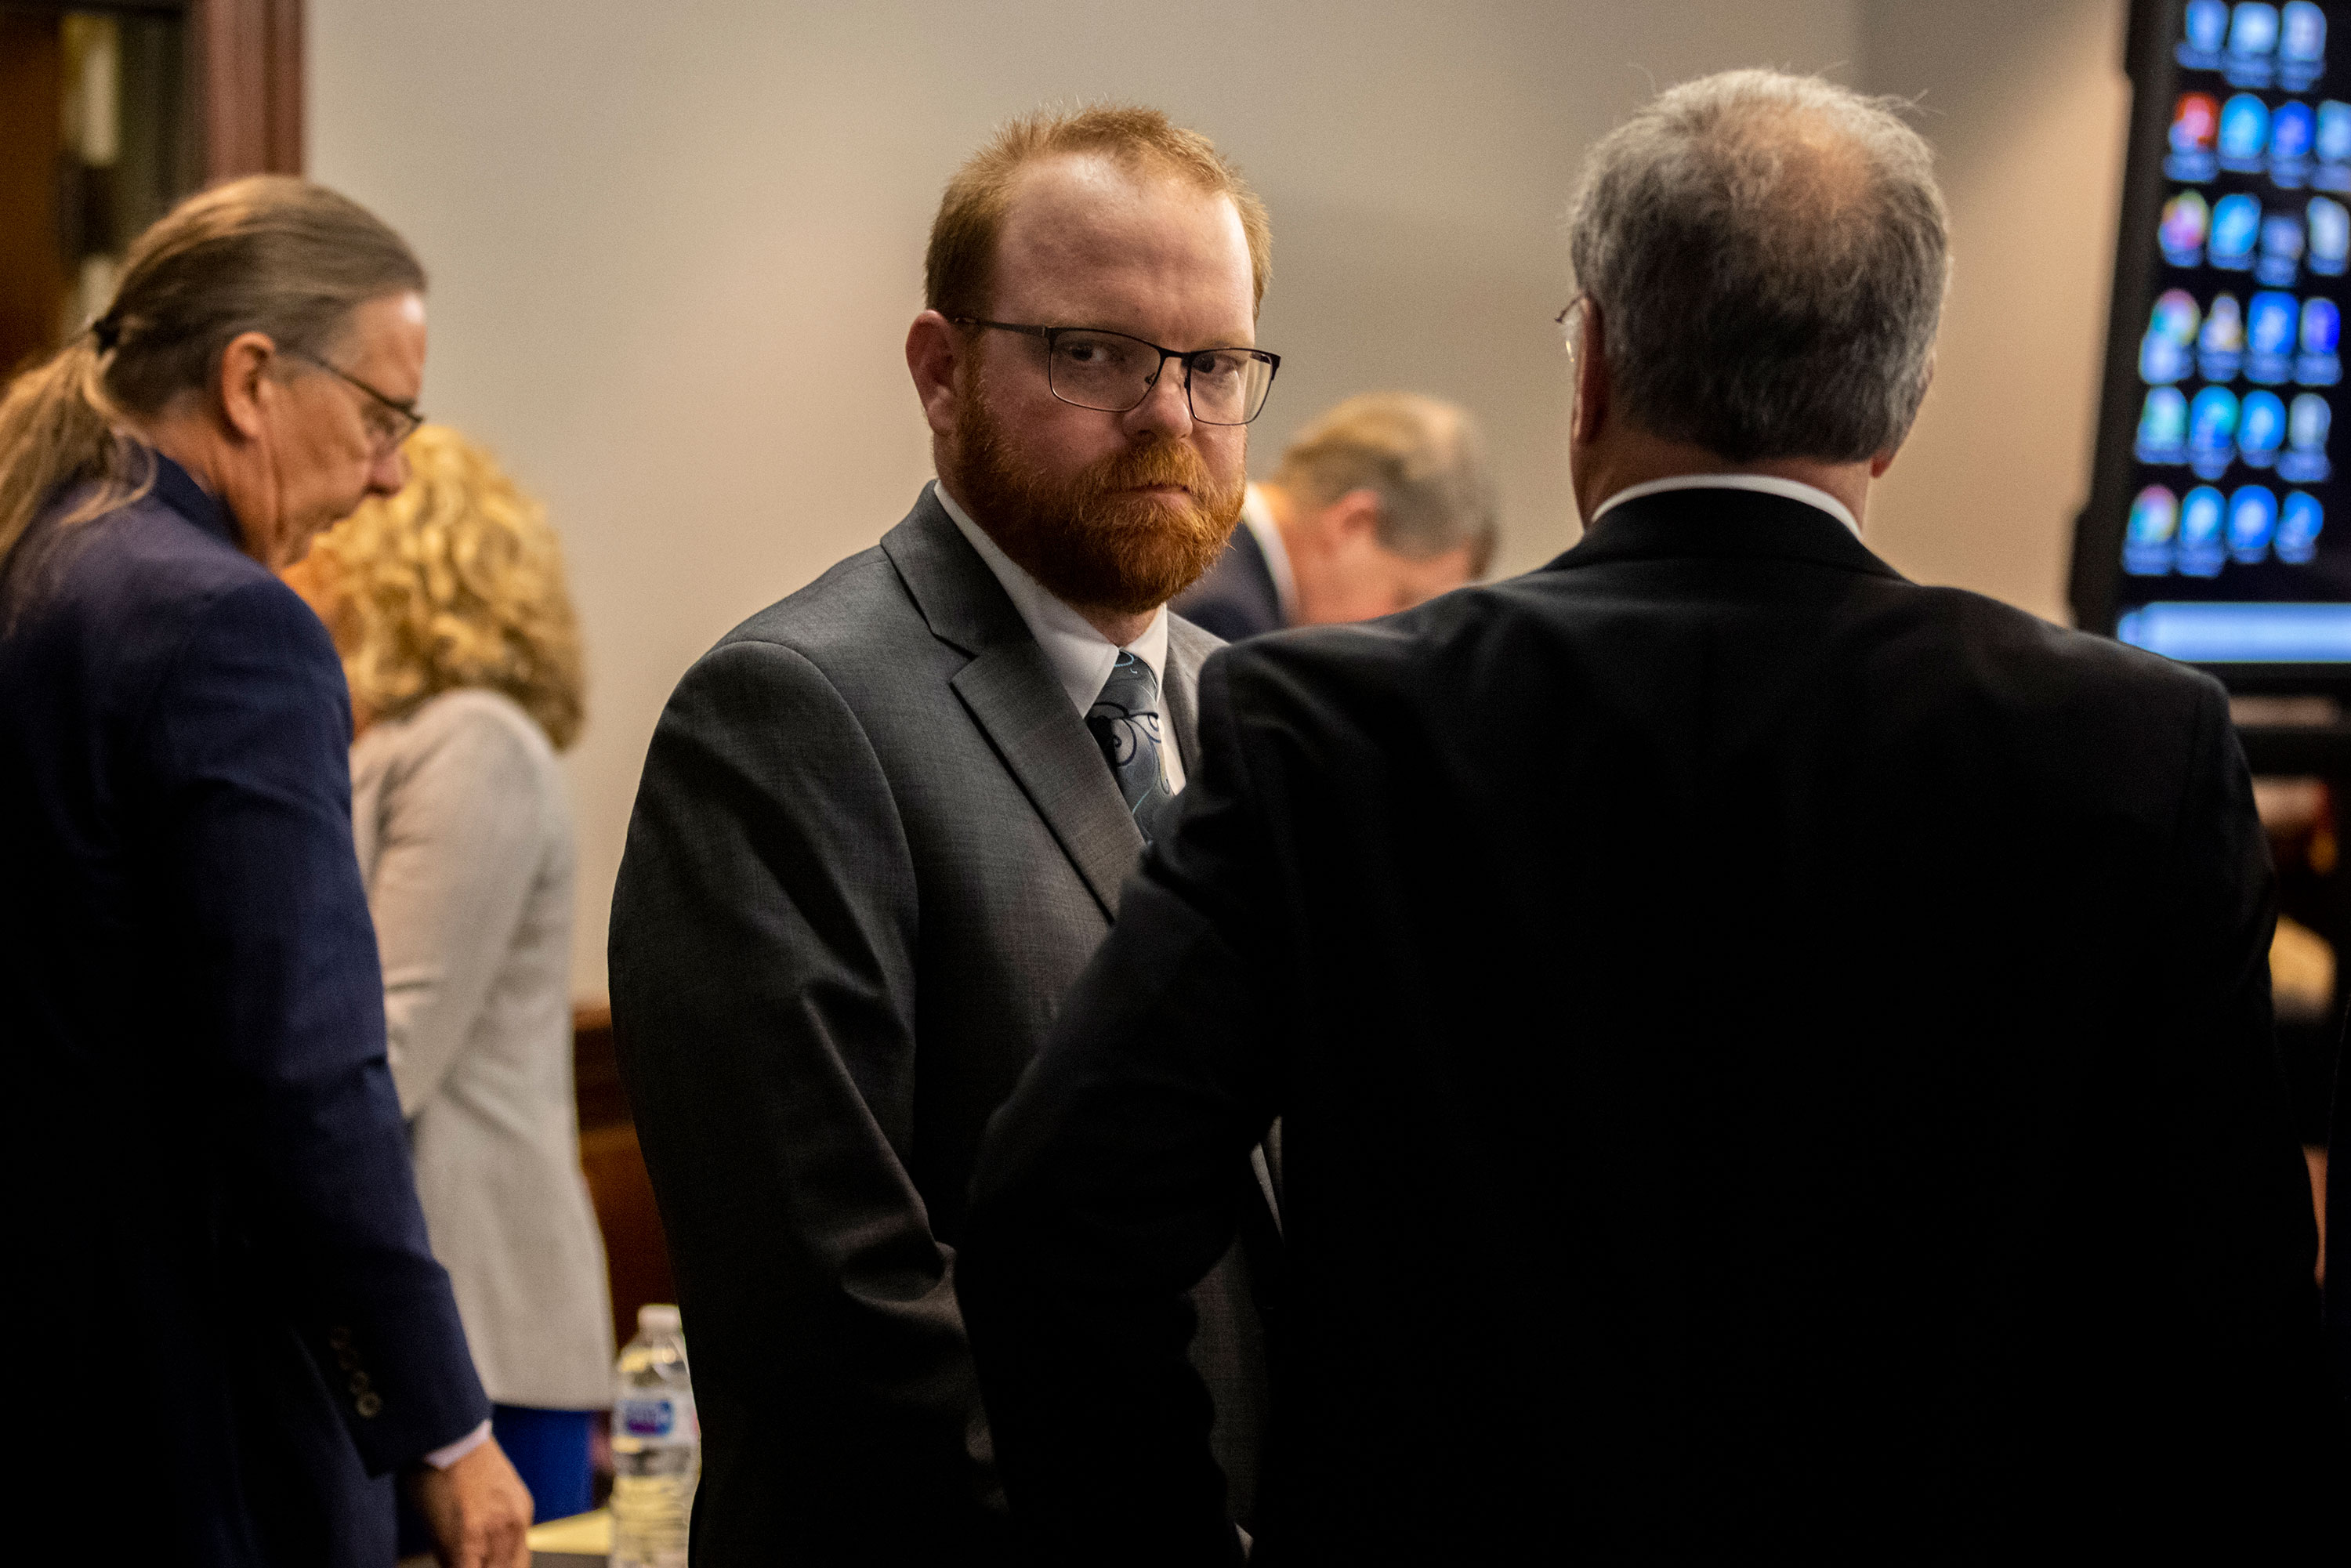 Travis McMichael looks back at his mother and sister in the courtroom after the jury convicted him for the murder of Ahmaud Arbery on Wednesday.